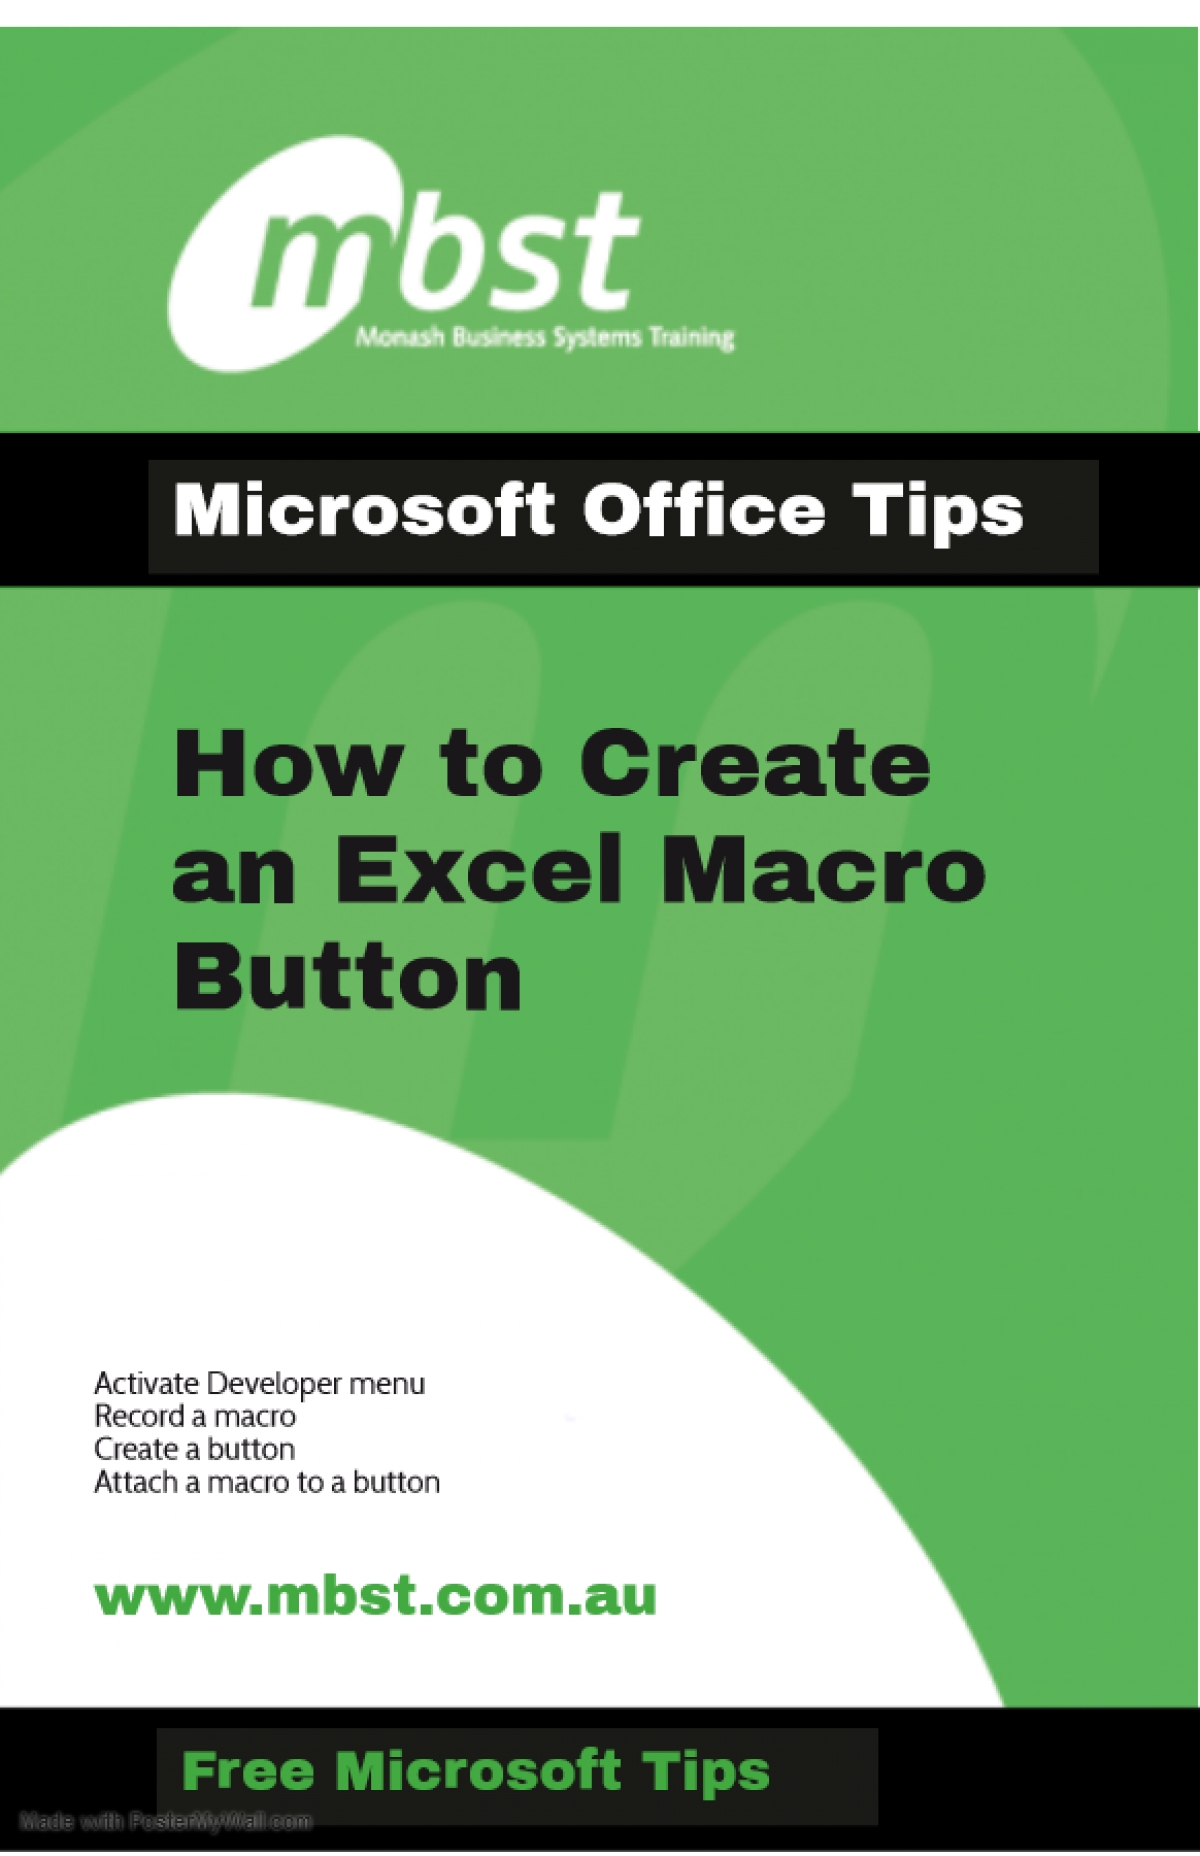 How to Create an Excel Macro Button